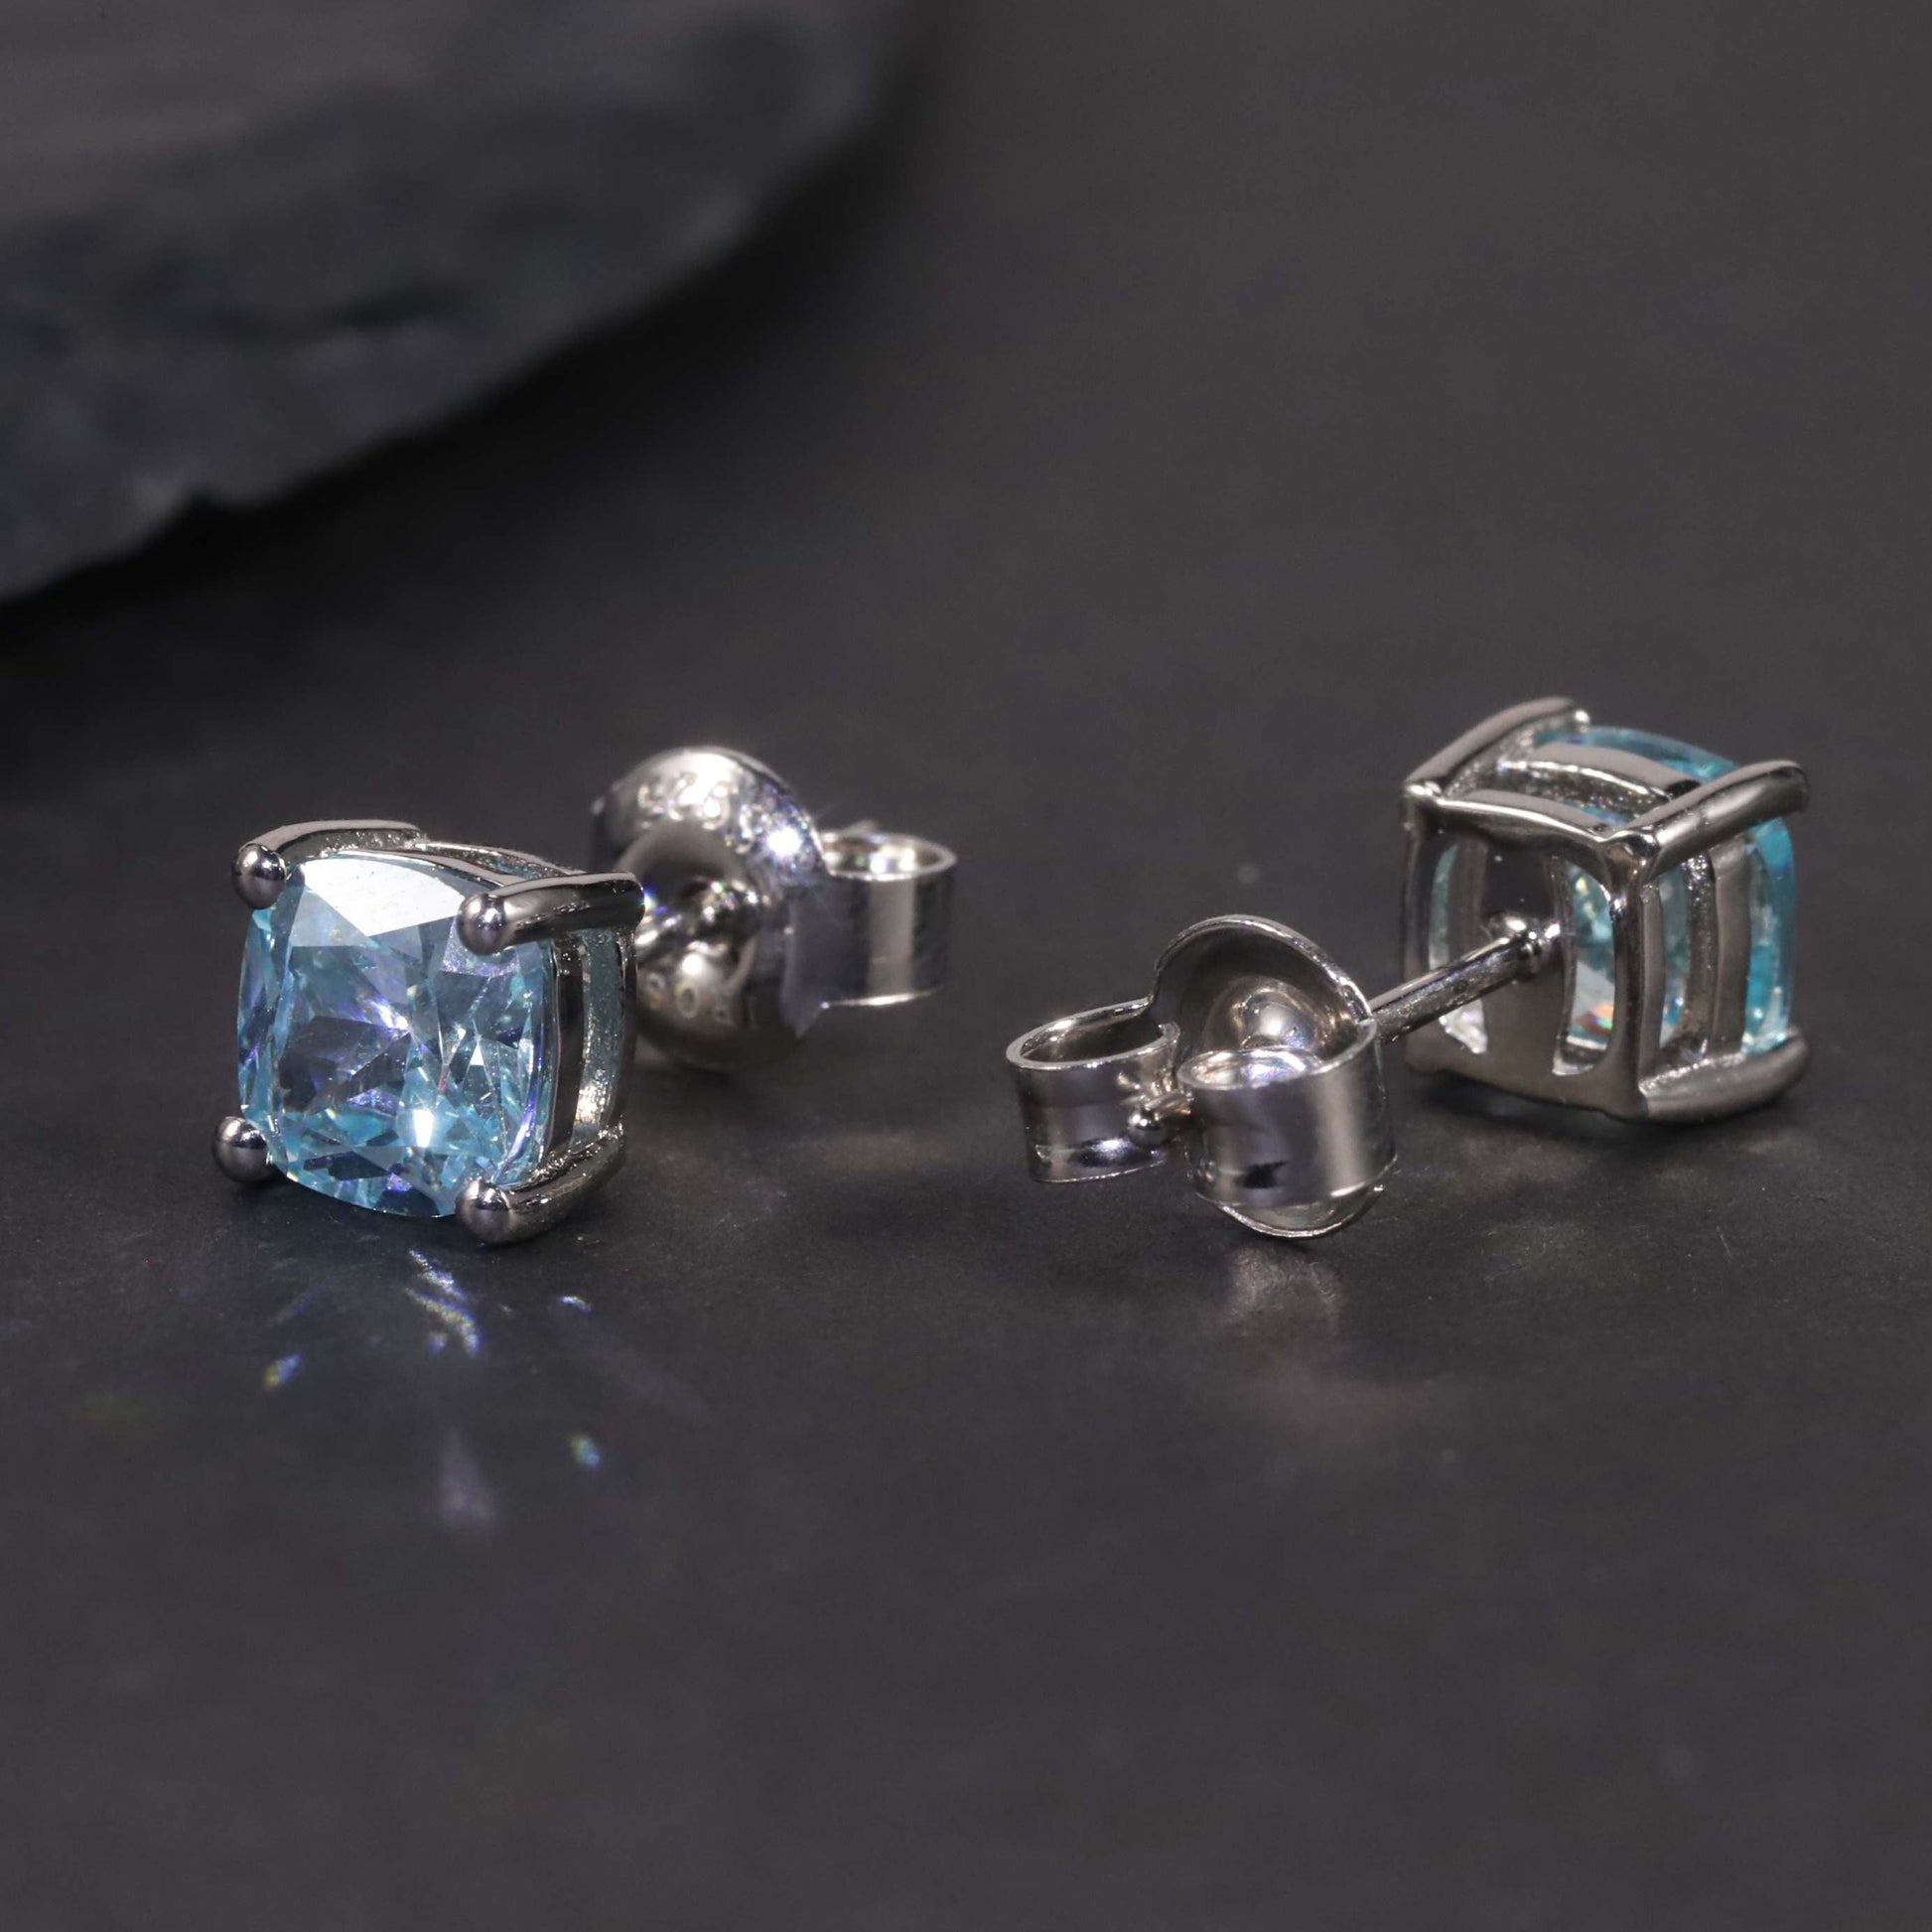 another view of swiss blue cushion cut earrings